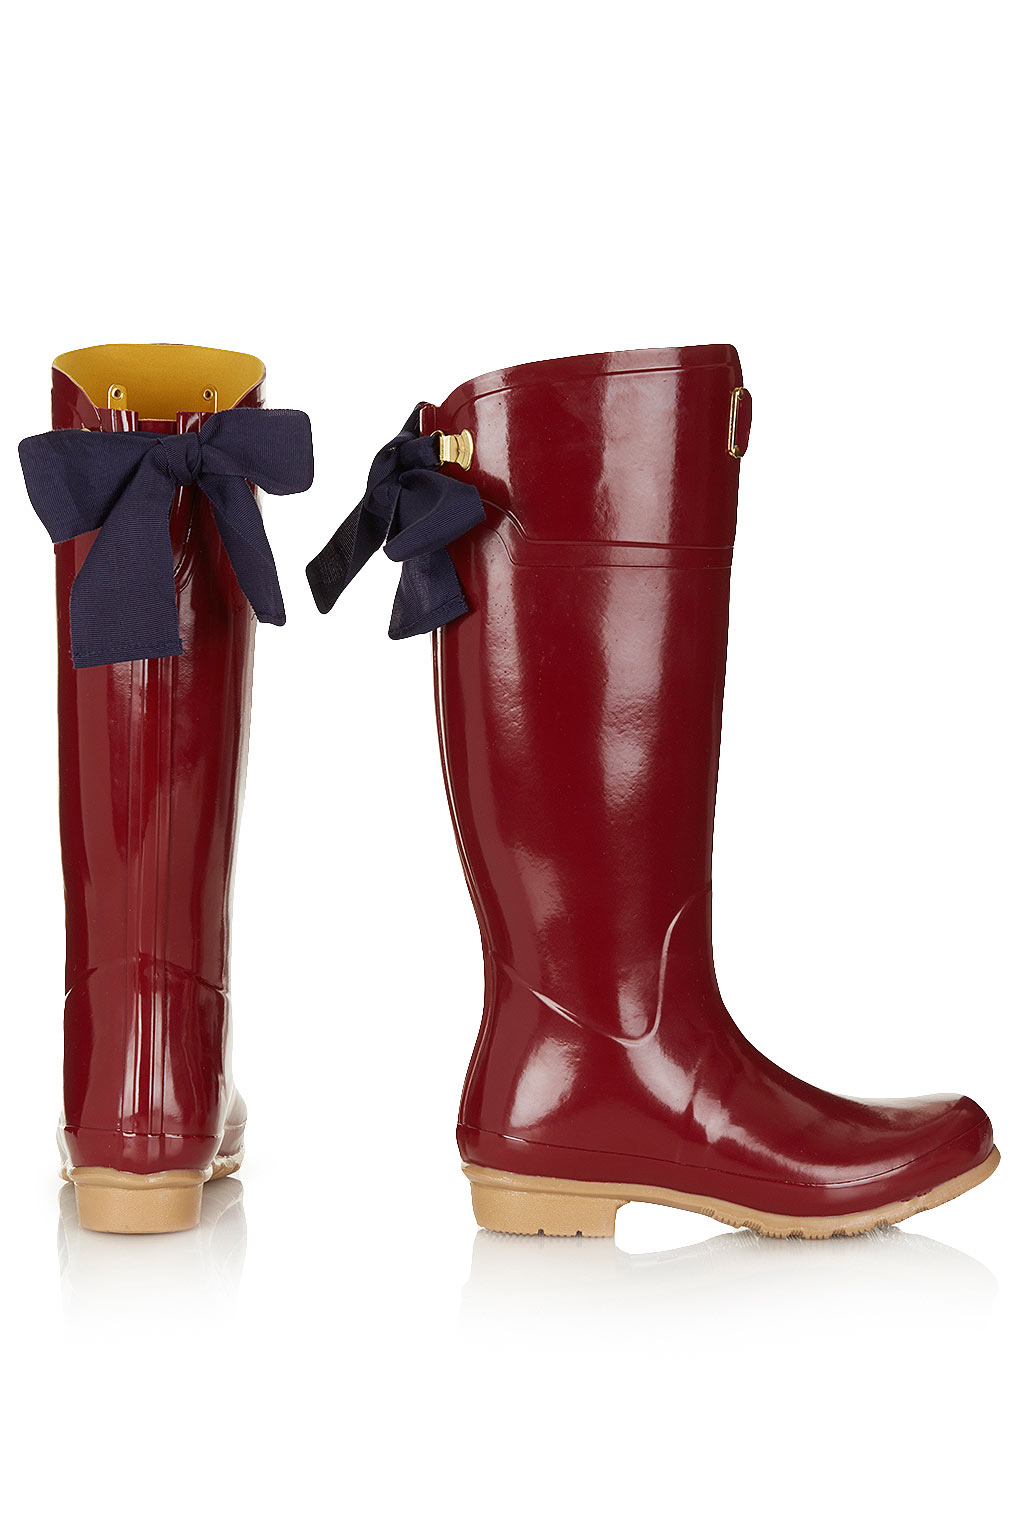 Lyst - Topshop Evedon Ribbon Wellies in Red